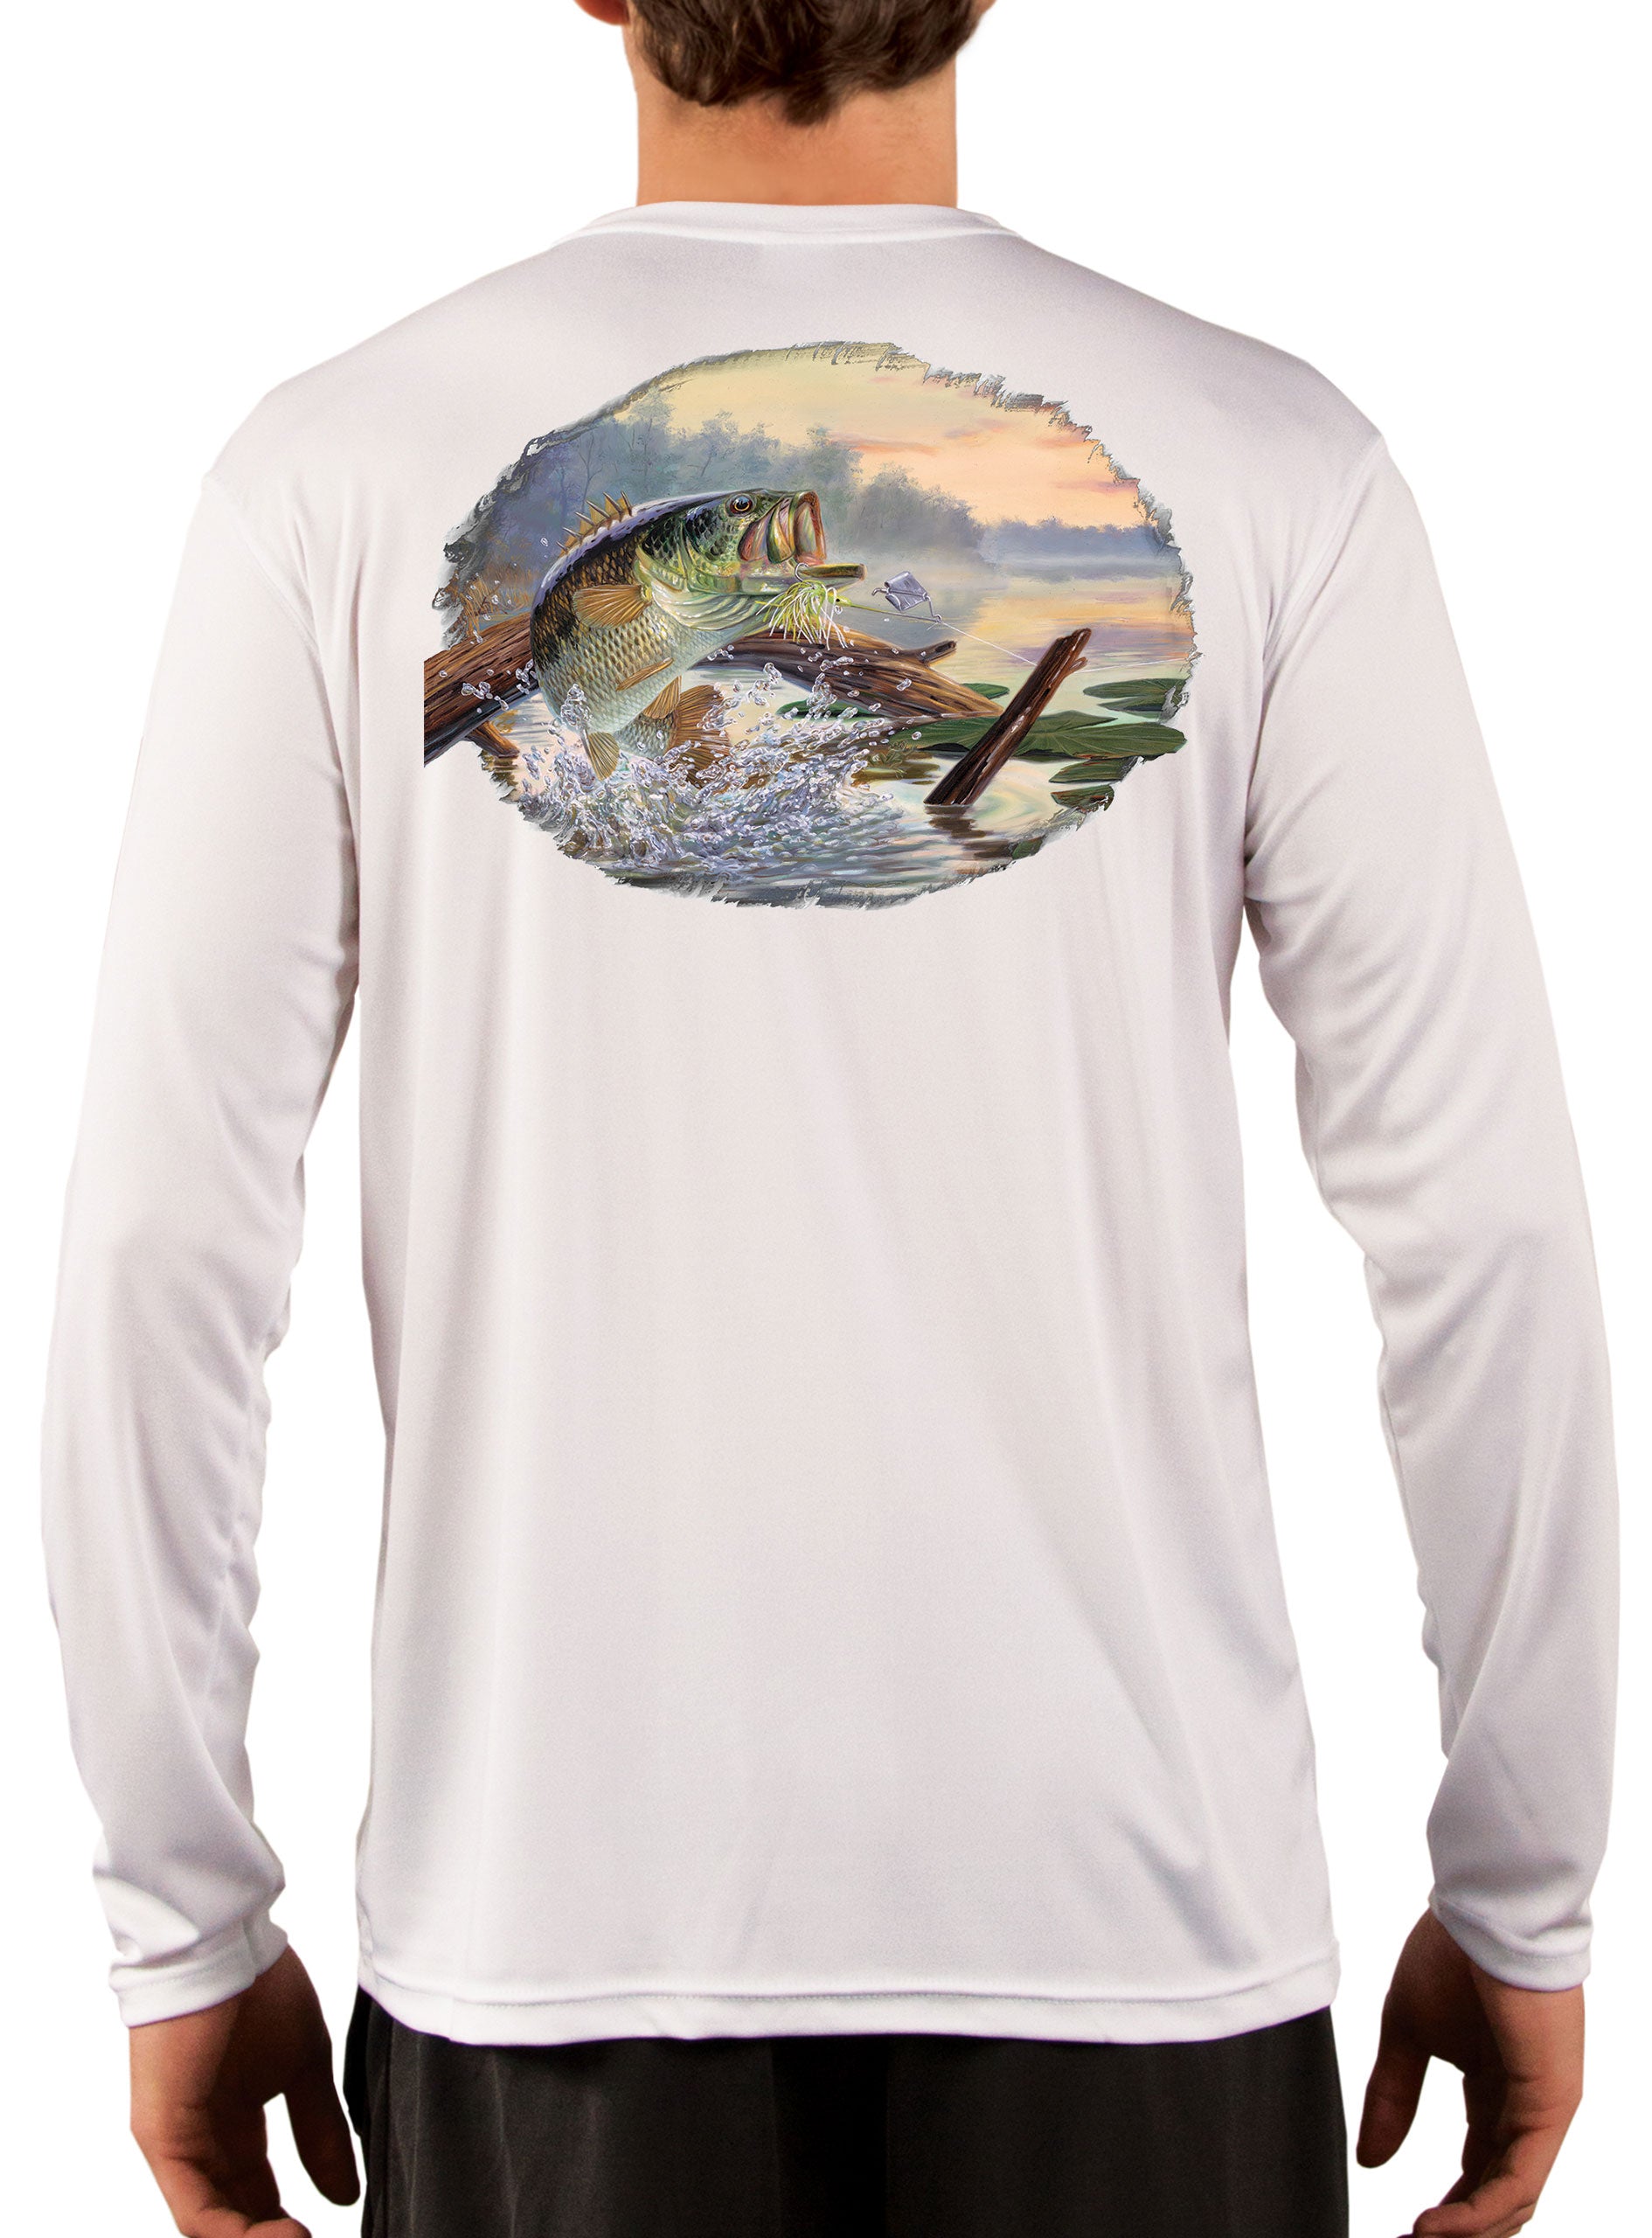 Large Mouth Bass Men's Fishing Shirts - Long Sleeve, Moisture Wicking, Non-fade Print, 50+ UPF Fabric UV Protection White / Large